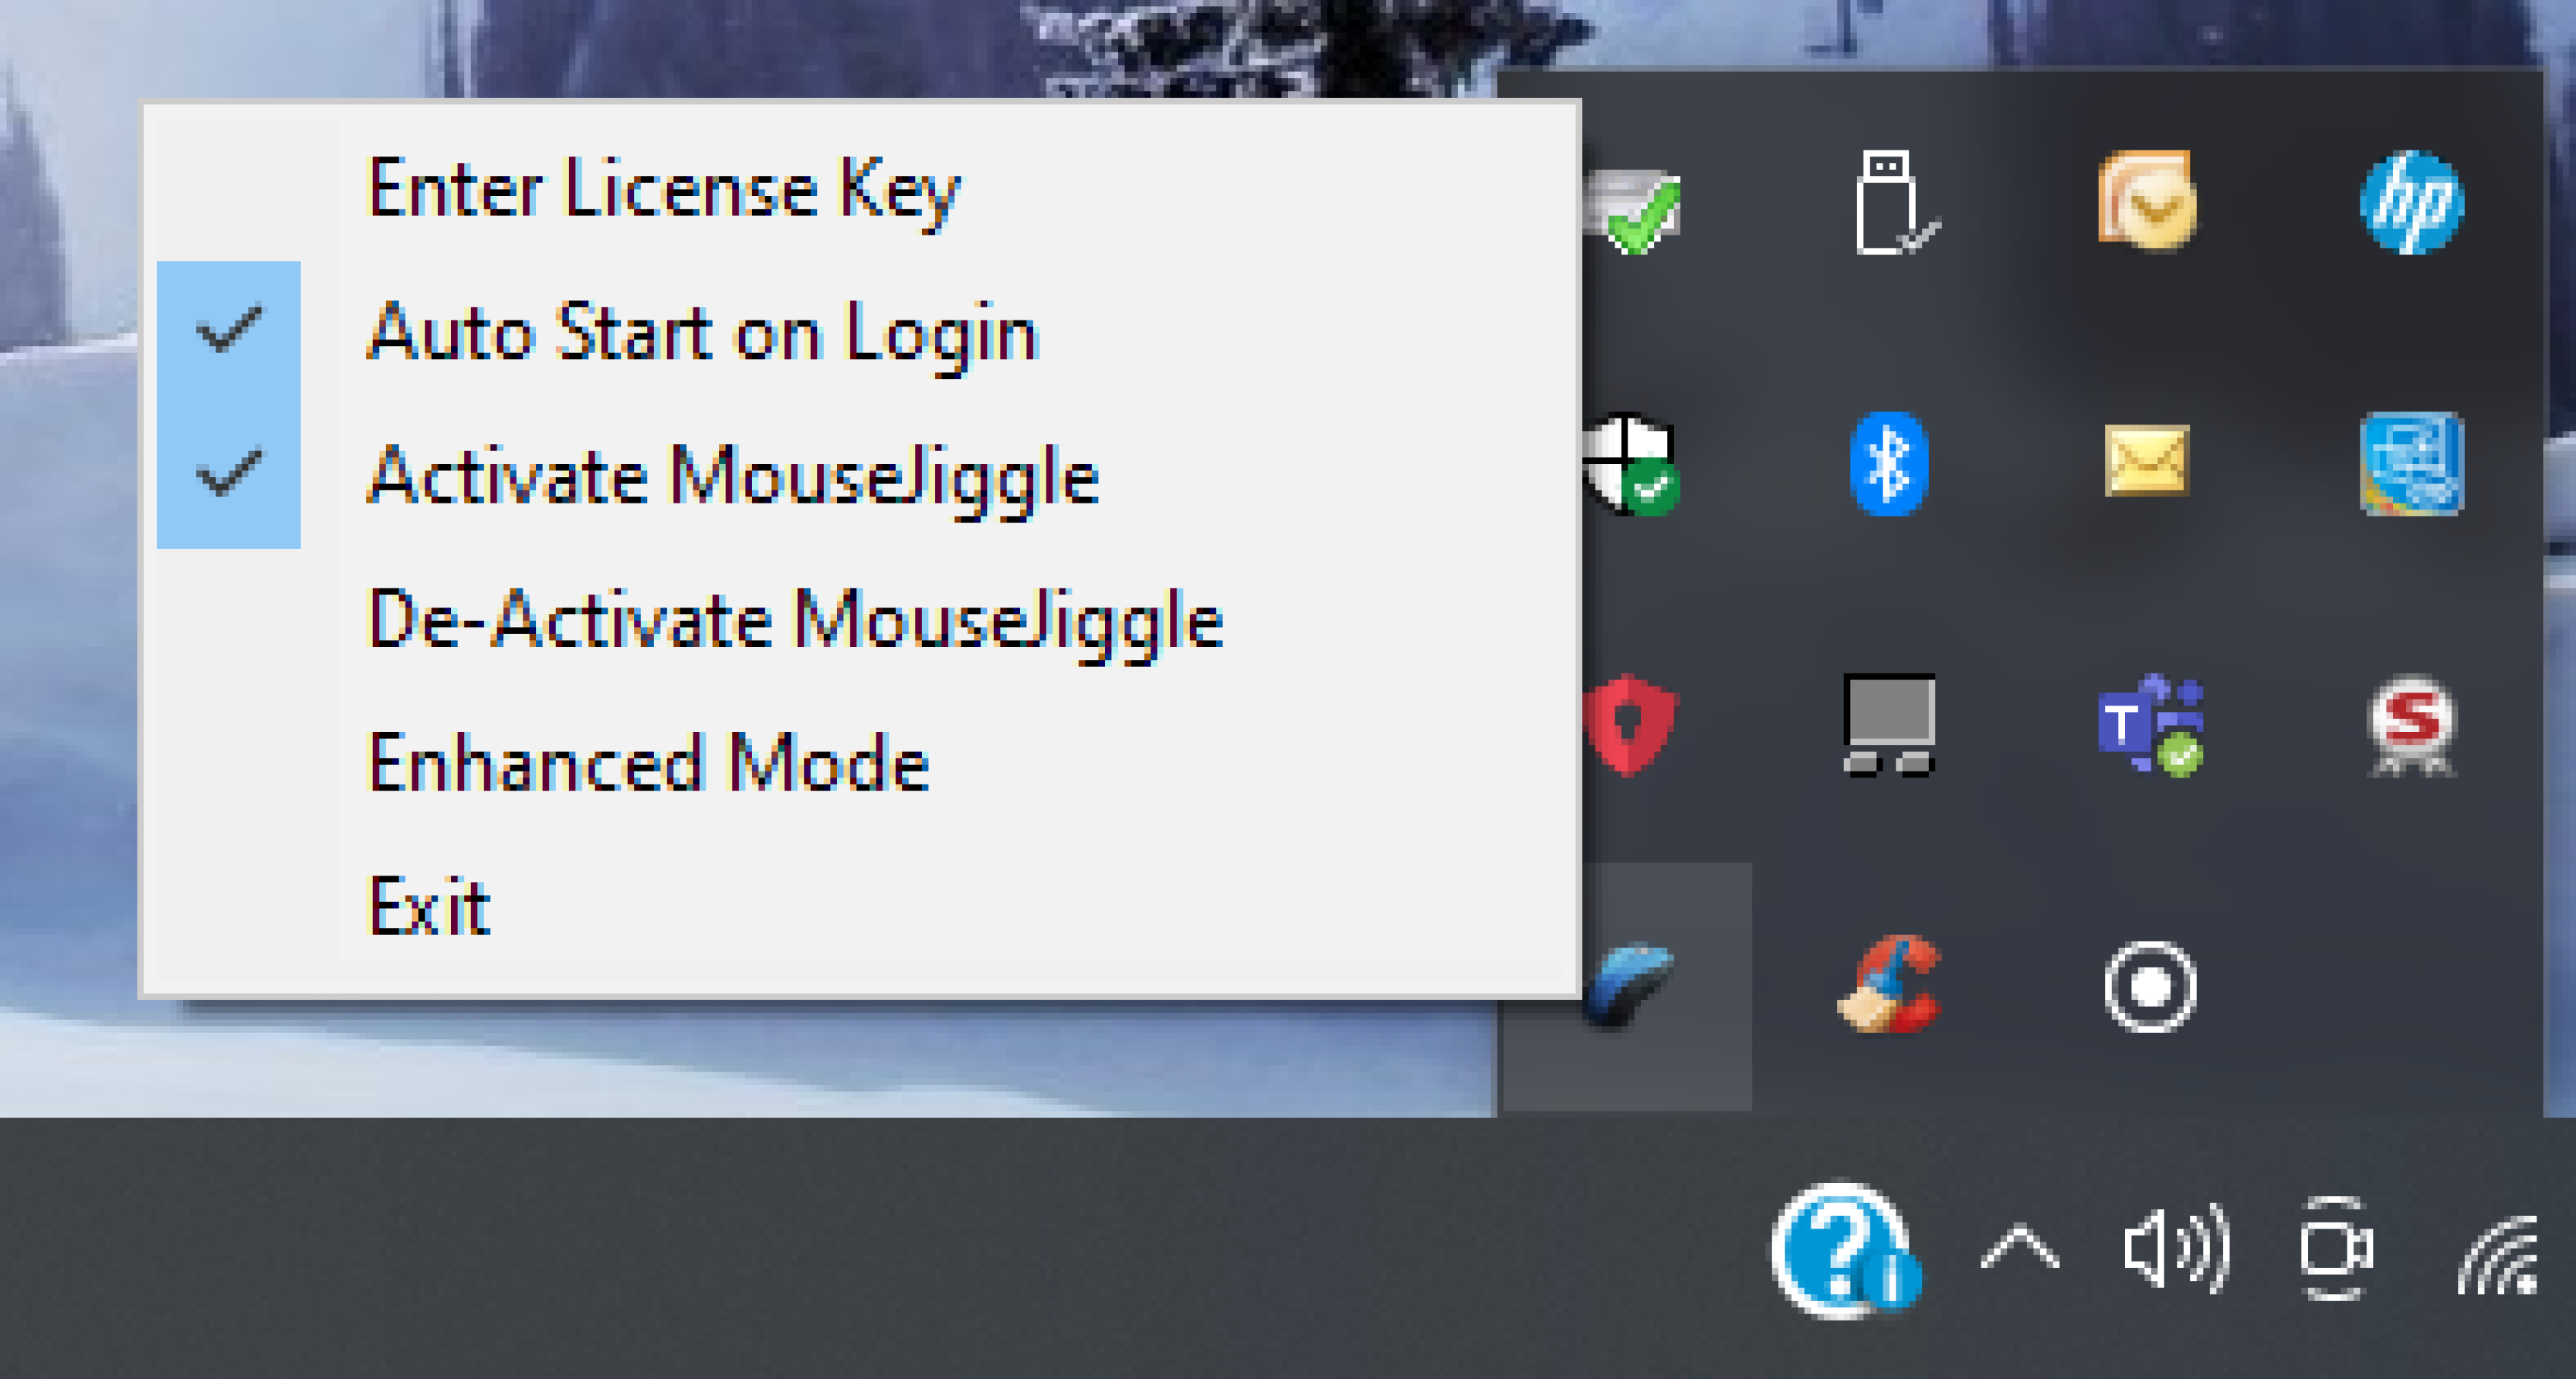 Right click on the blue & black mouse jiggle icon to customize it's properties